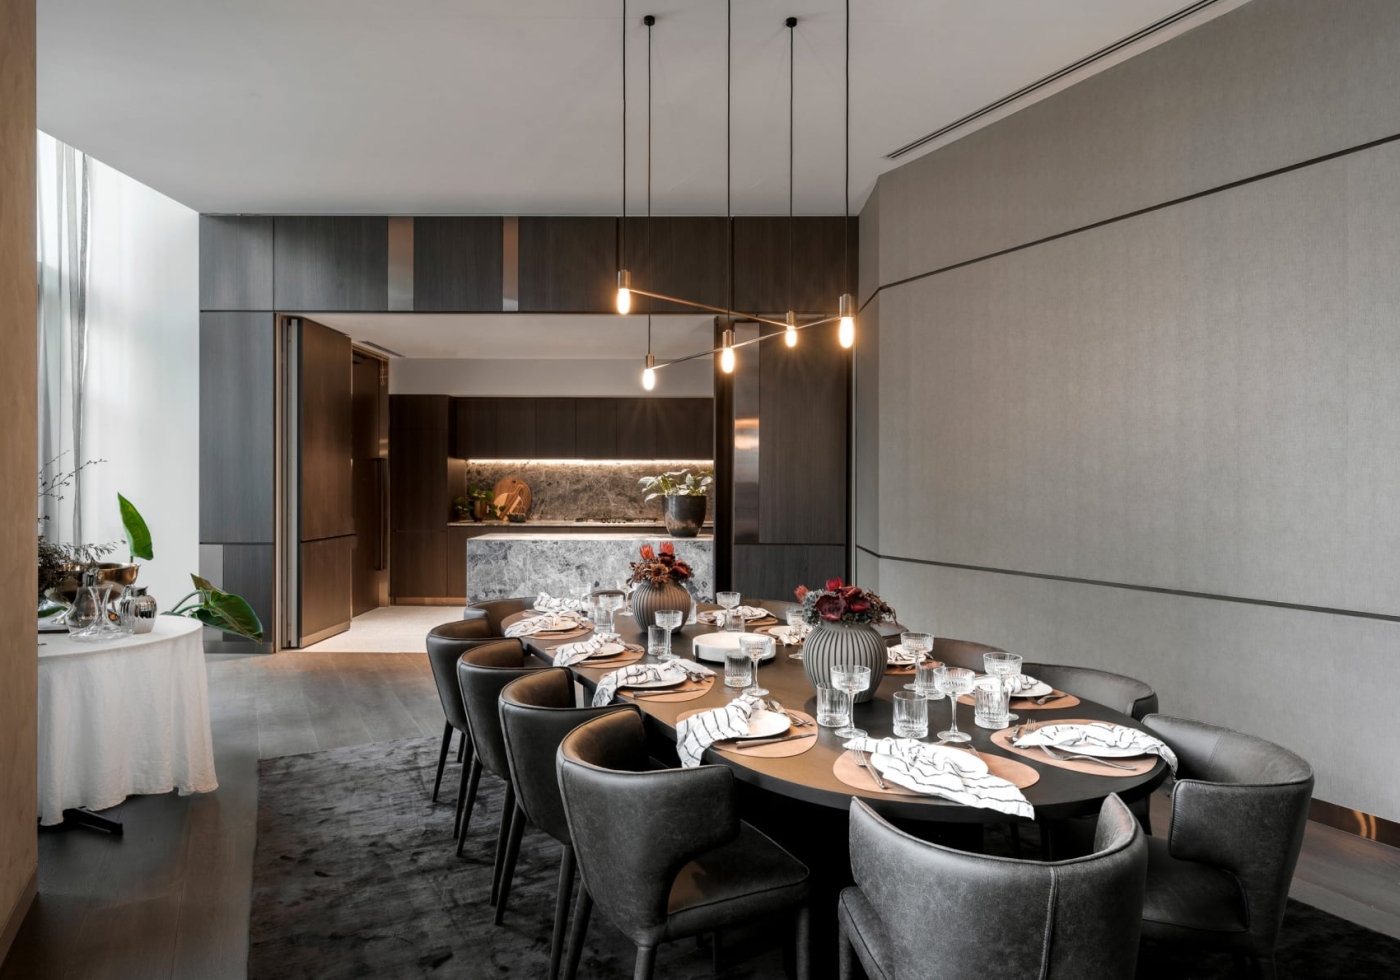 A chef’s room with private dining area